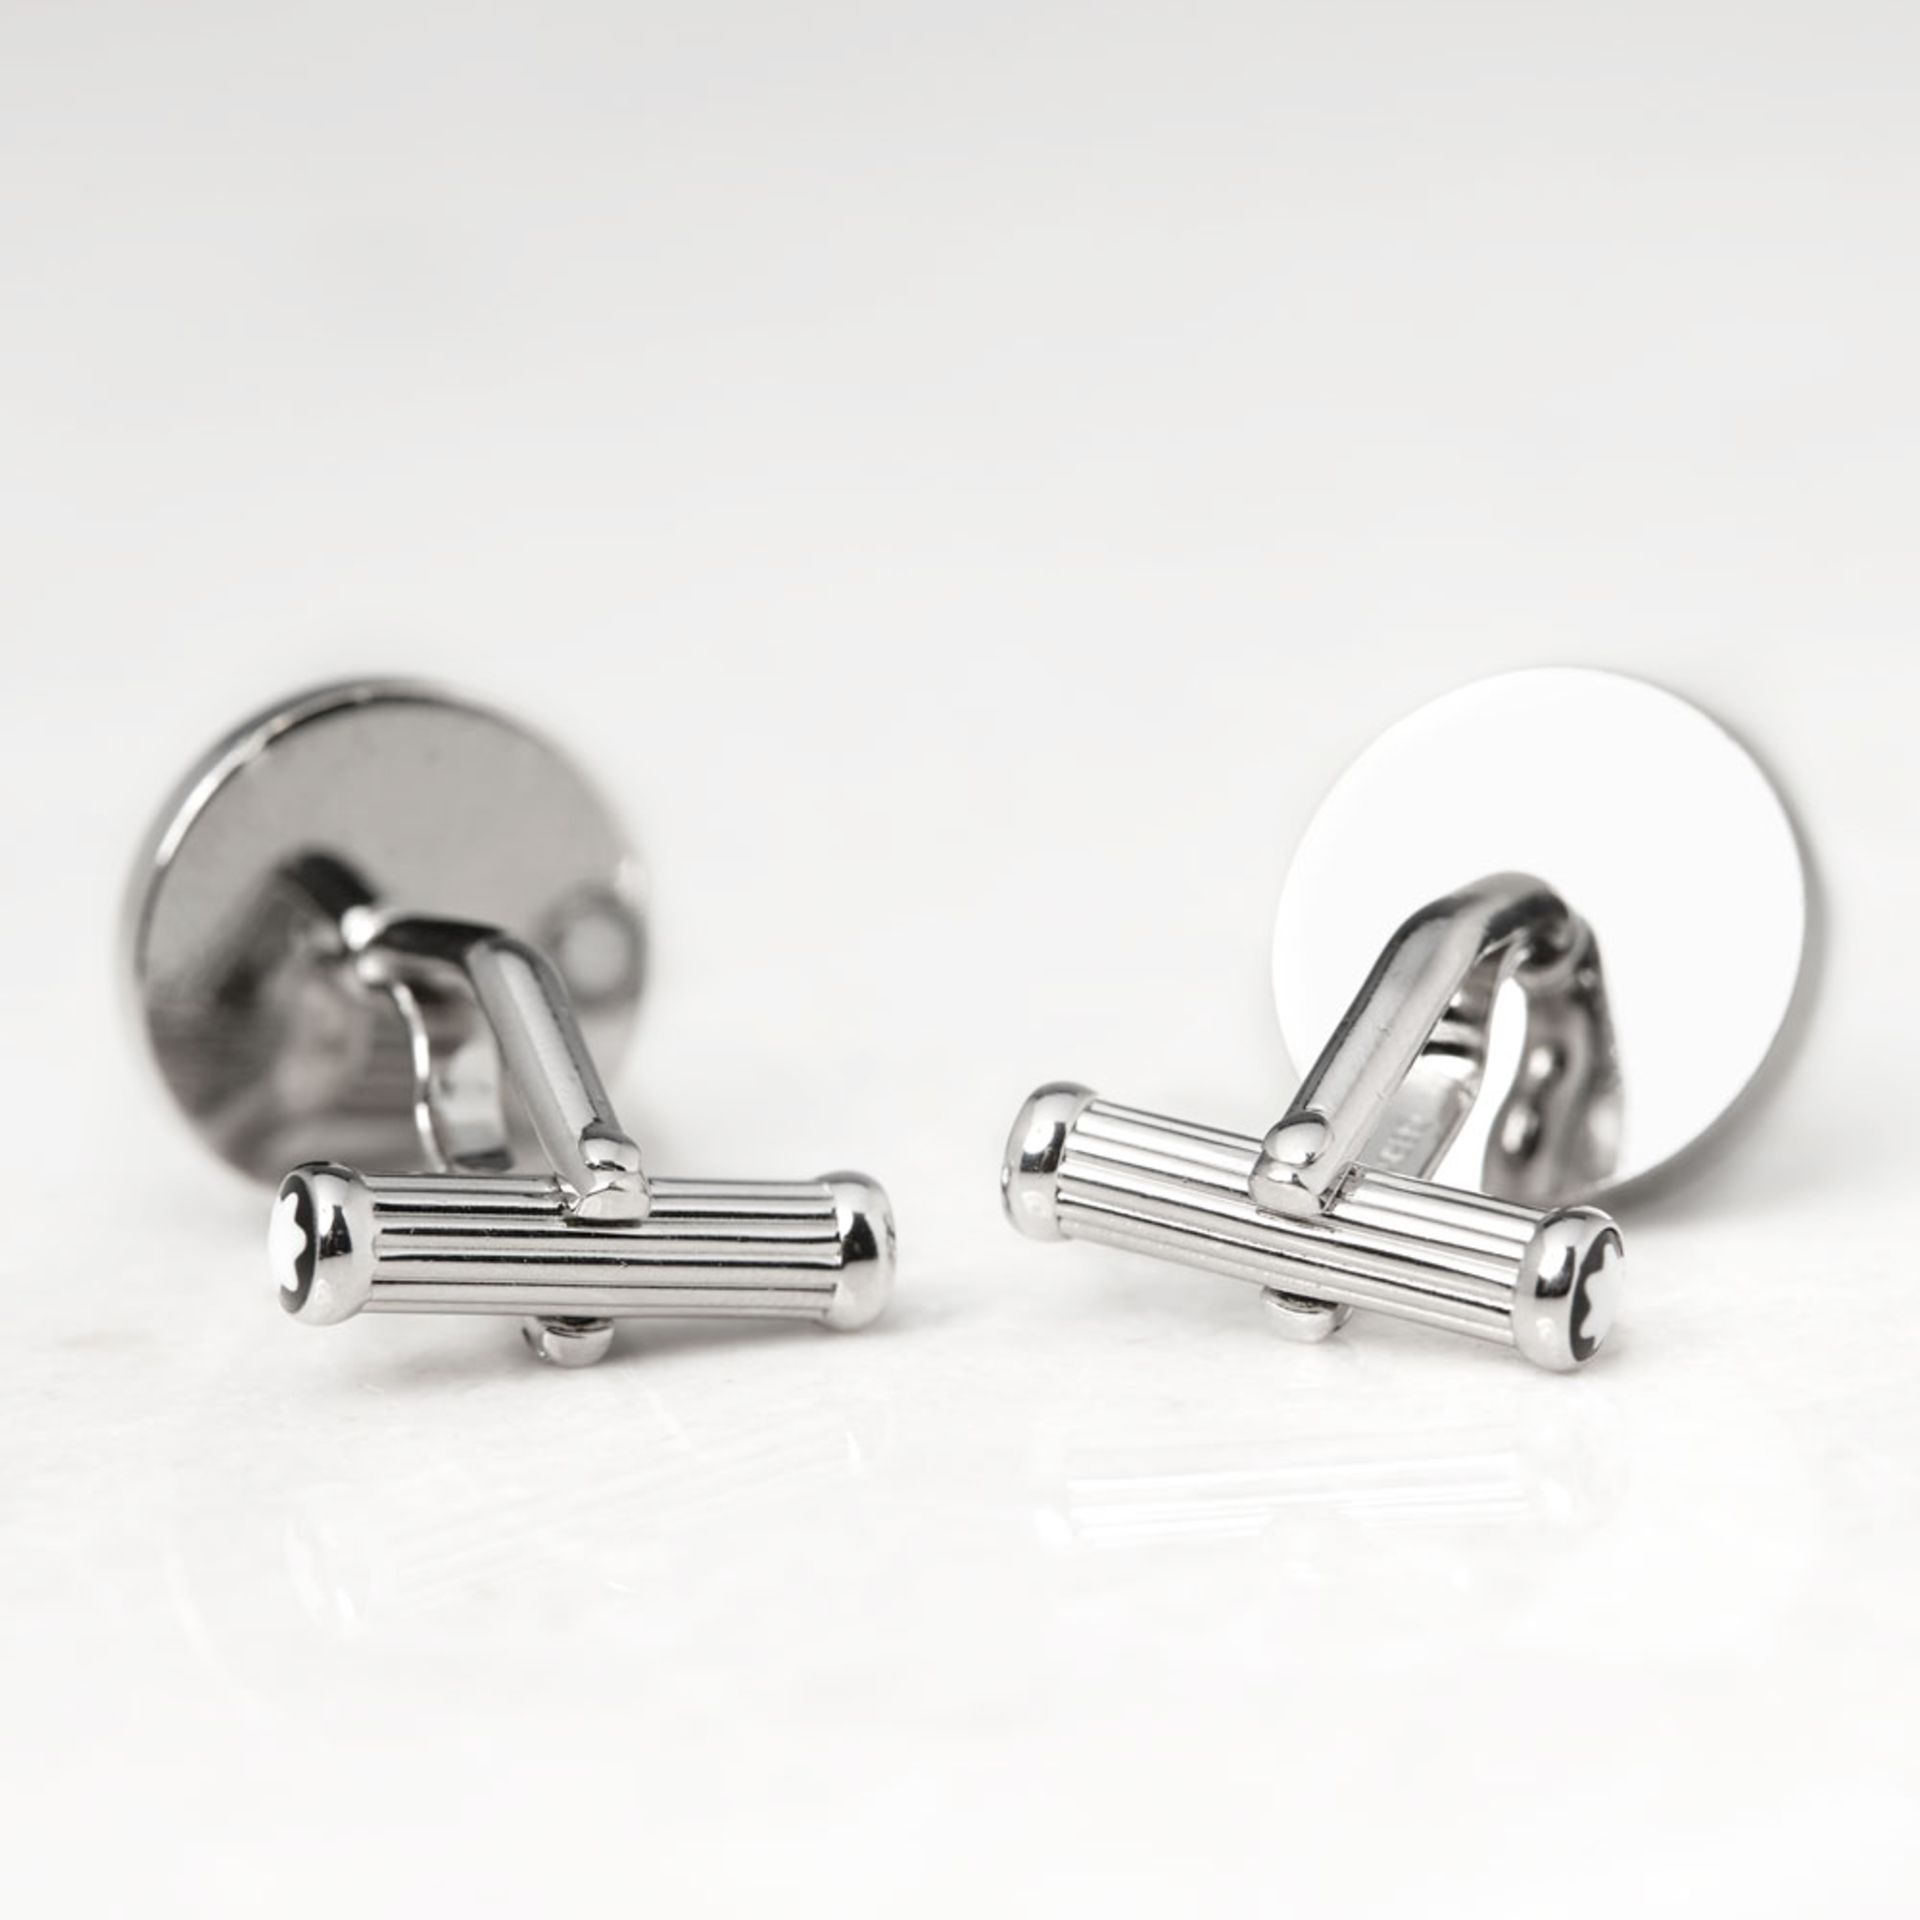 Montblanc Stainless Steel Black Onyx Iconic Cufflinks - Image 3 of 4